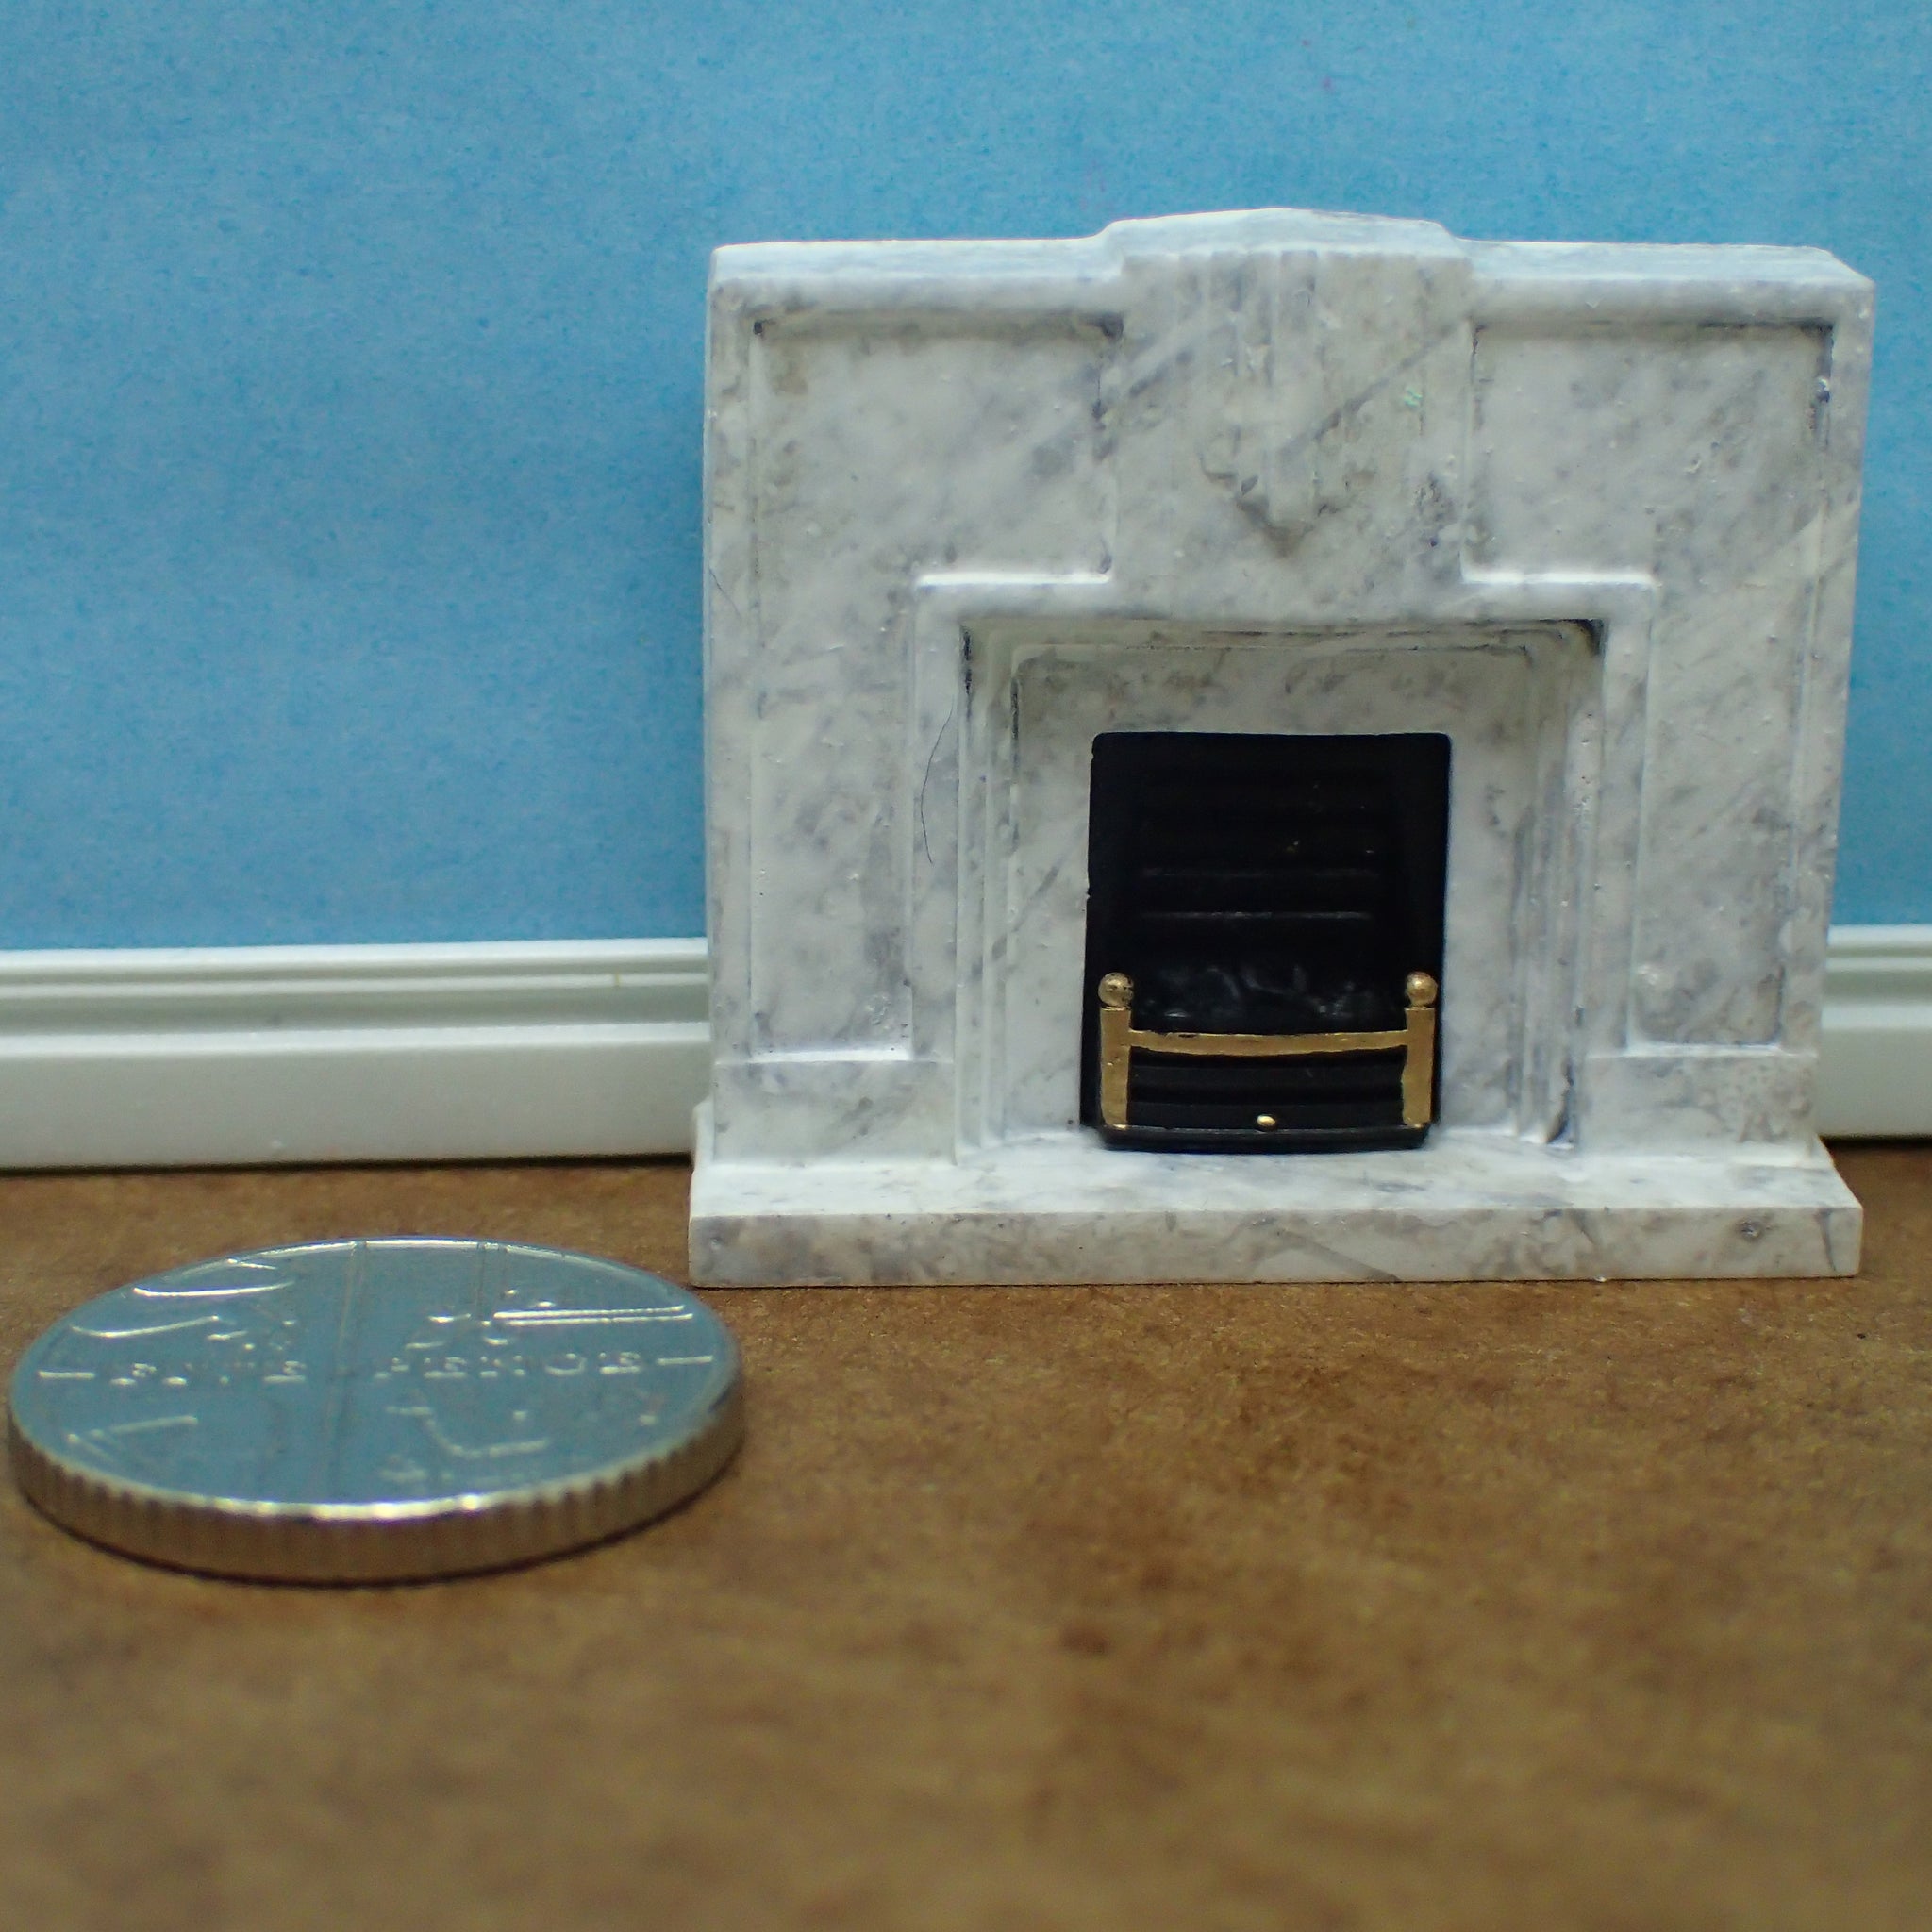 Art Deco style 'marble' fireplace, 1/48th scale